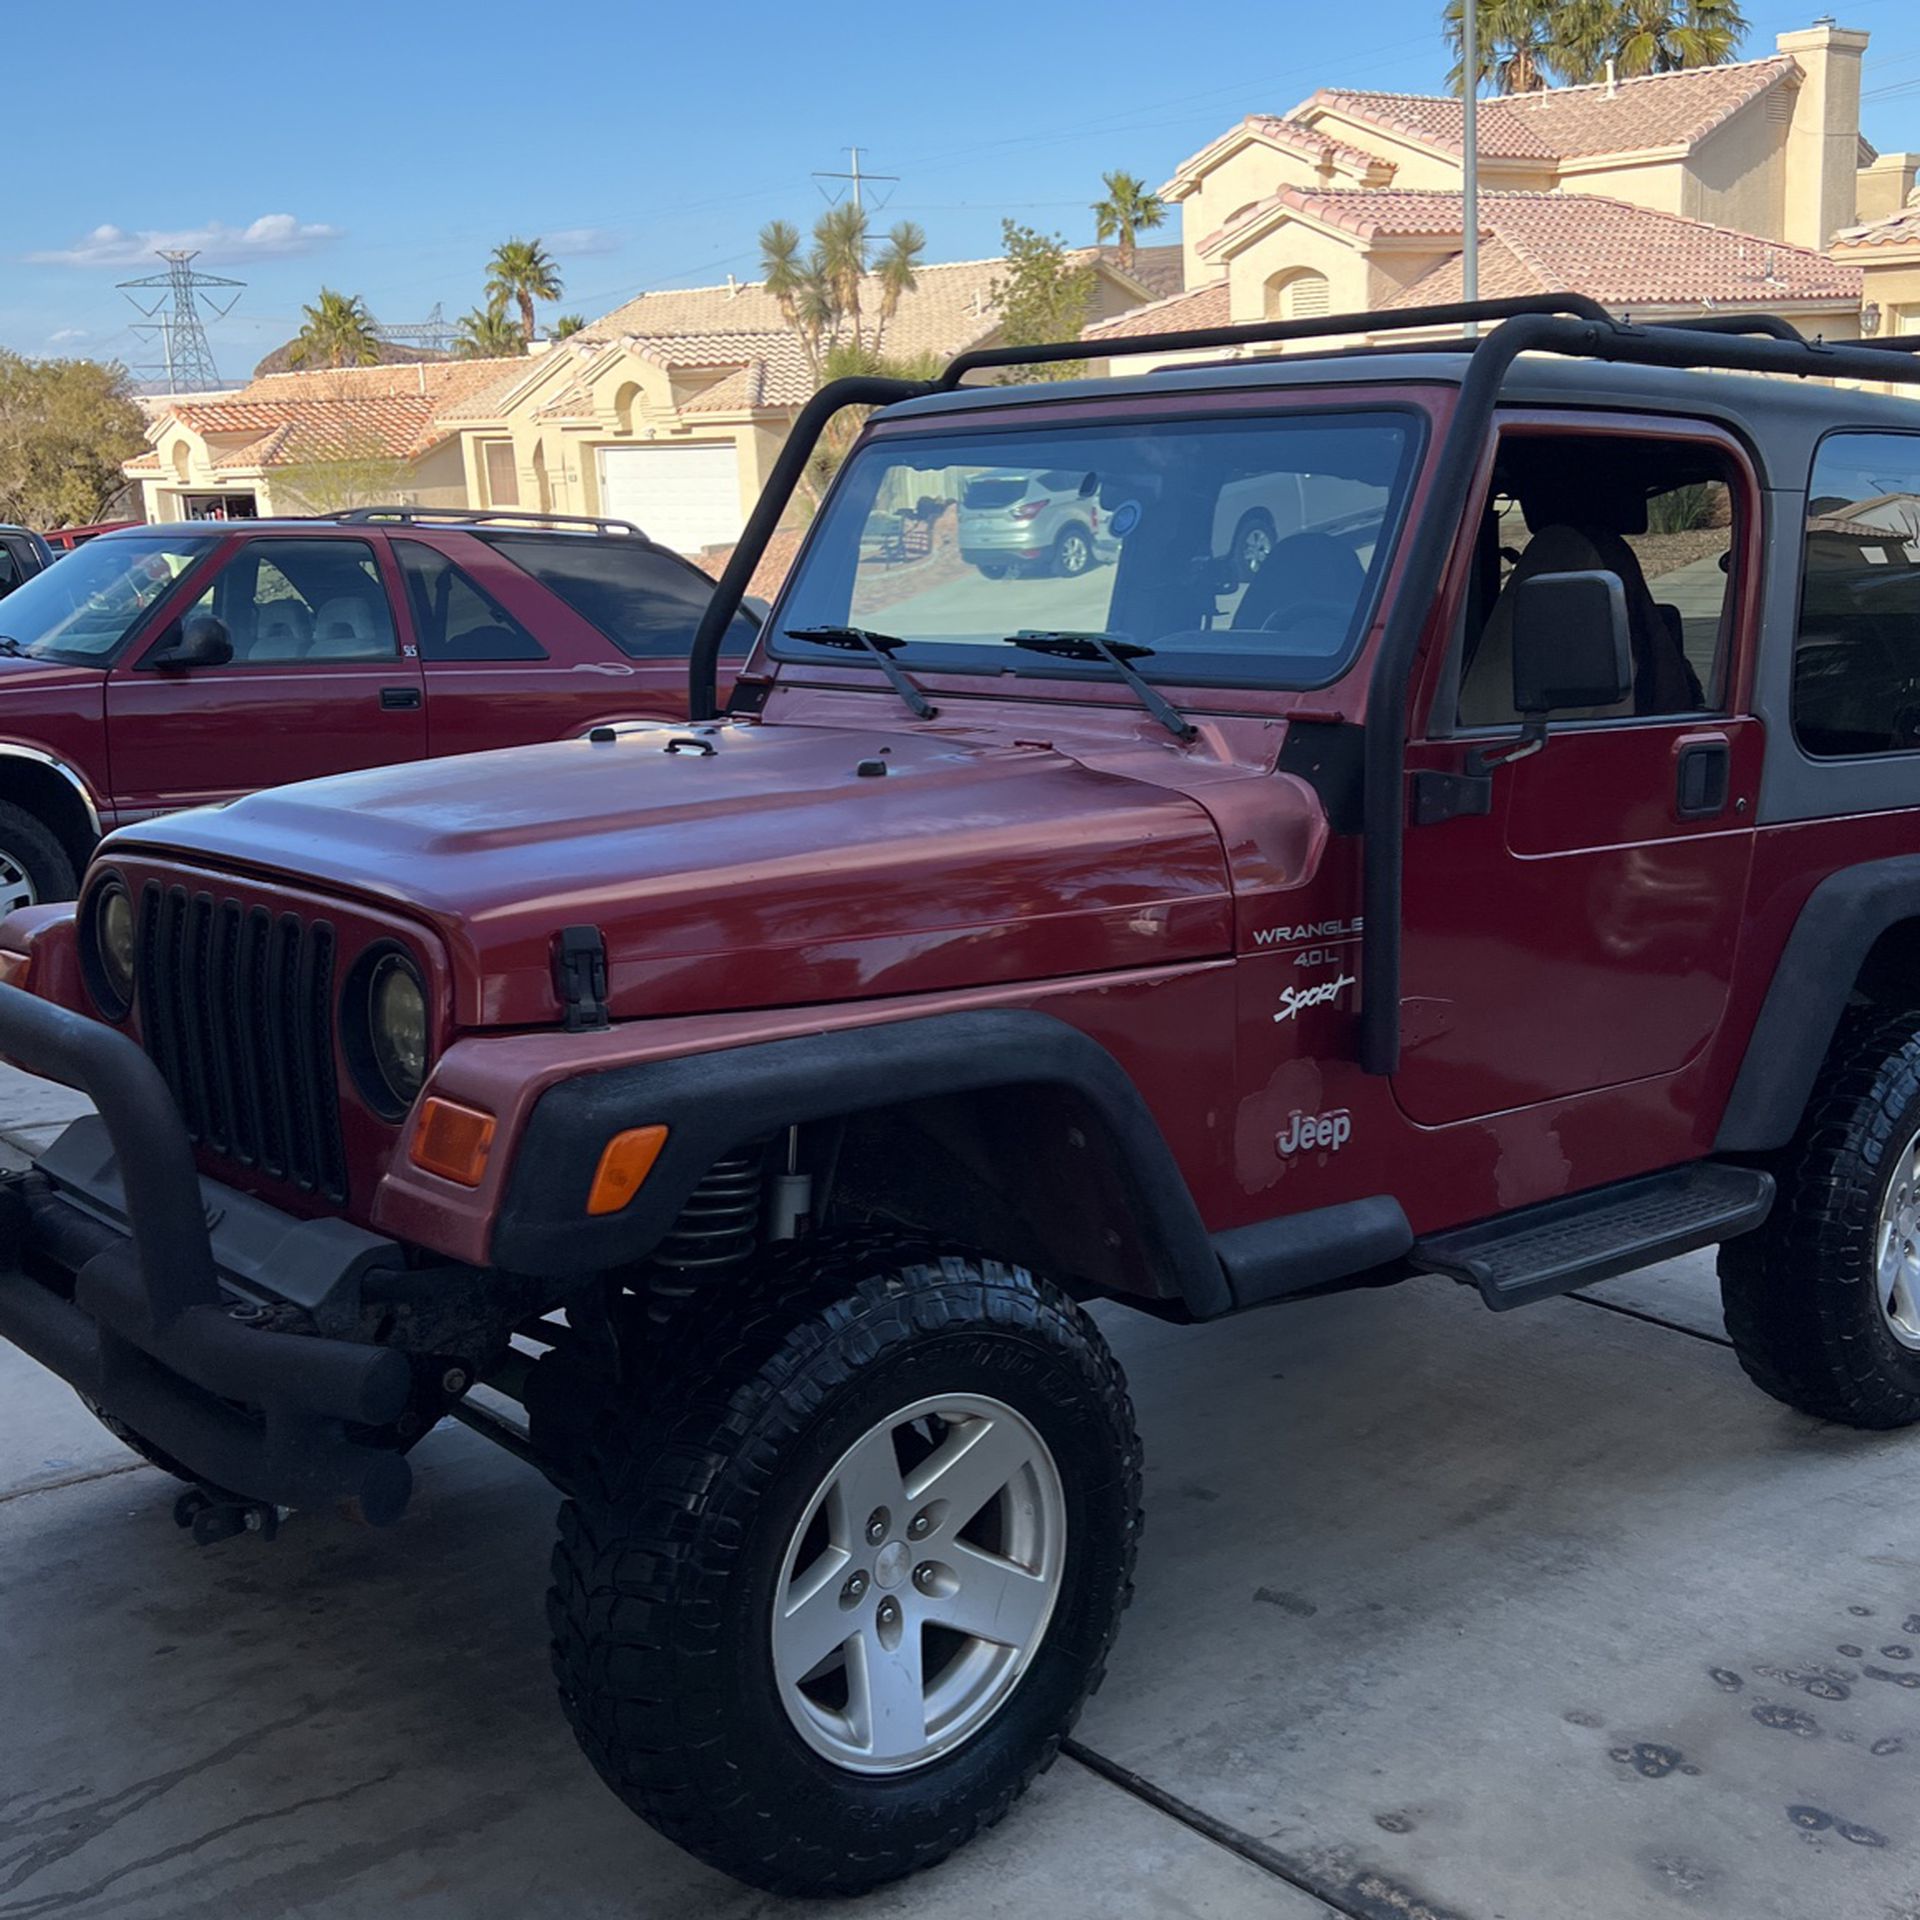 1998 Jeep Wrangler for Sale in Henderson, NV - OfferUp